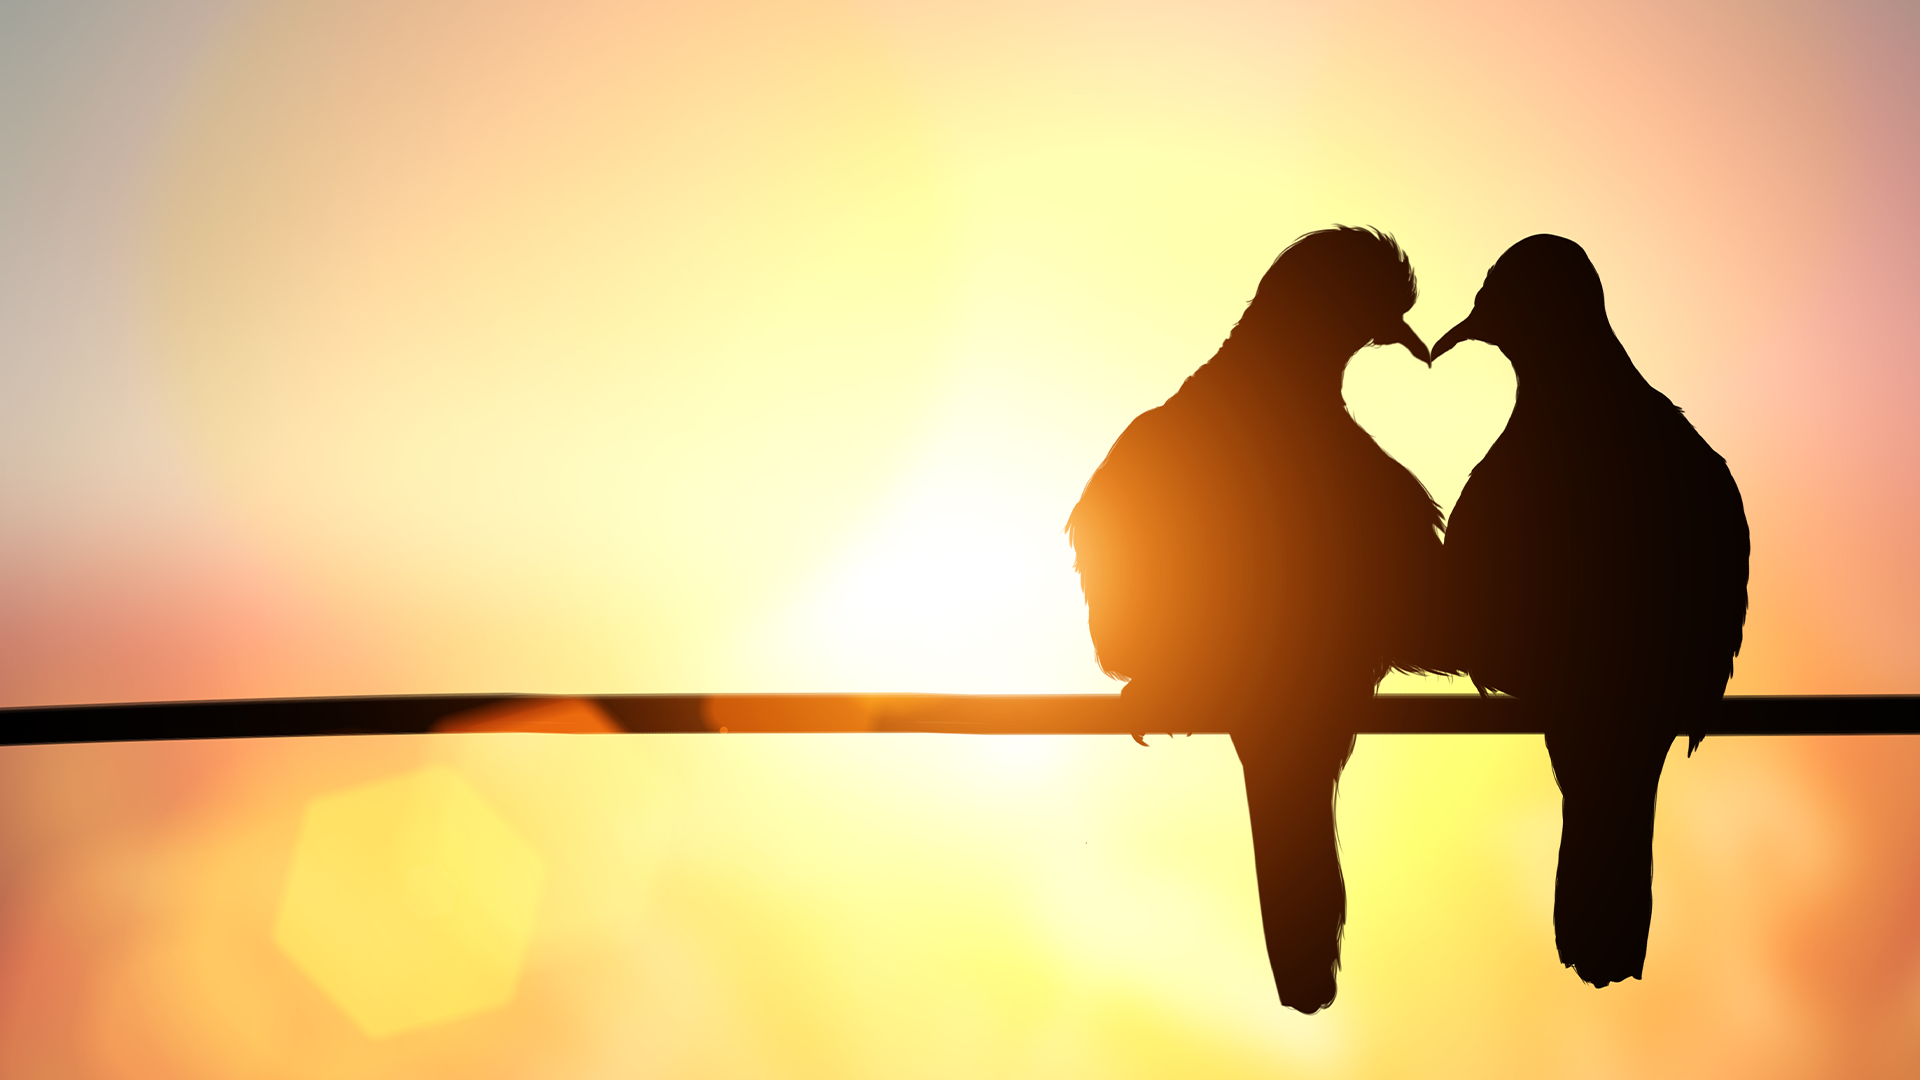 Two birds on a branch kissing at sunset